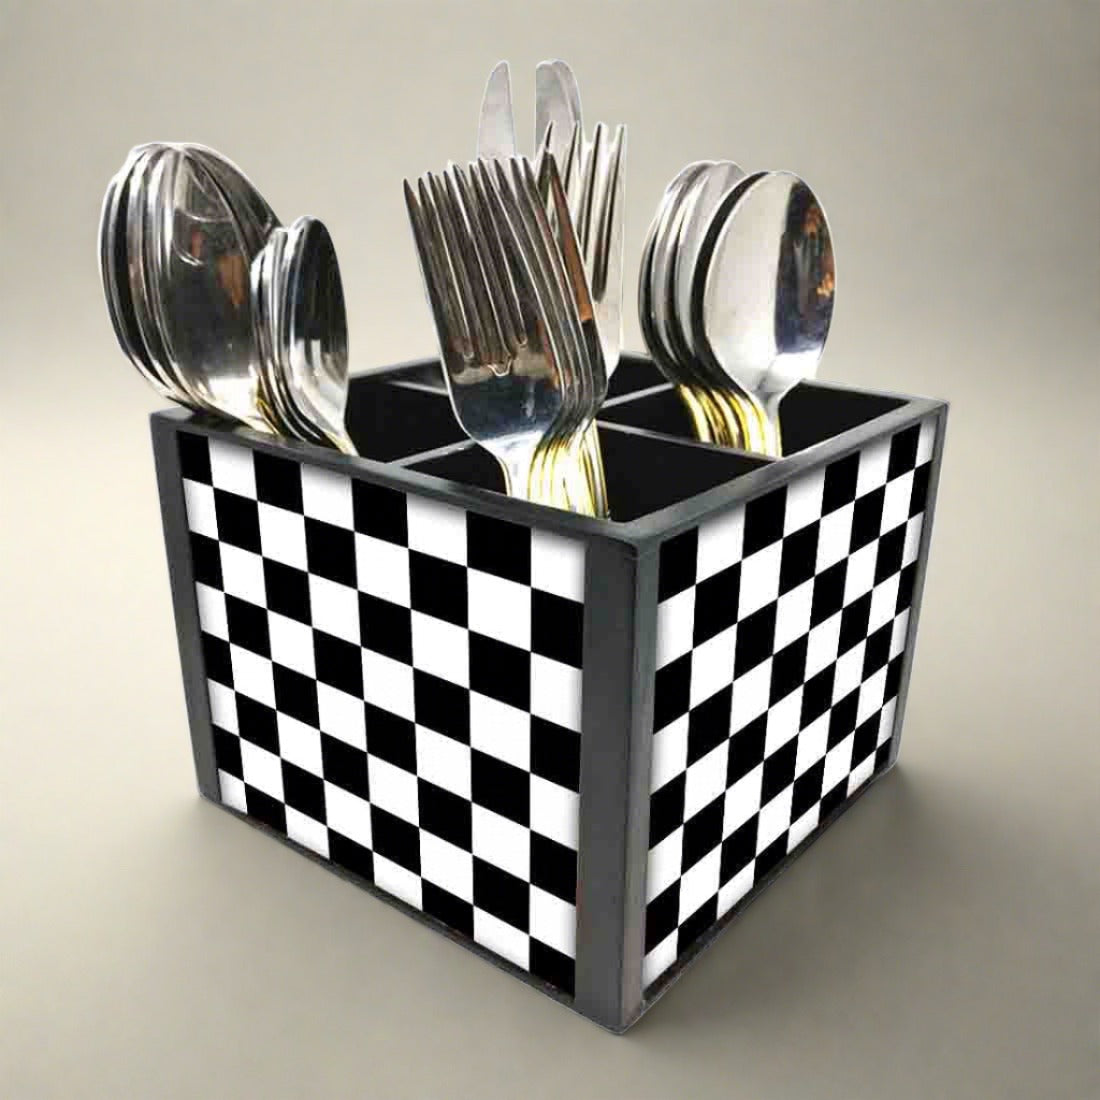 Wooden Cutlery Holder Stand - Chess Box Nutcase